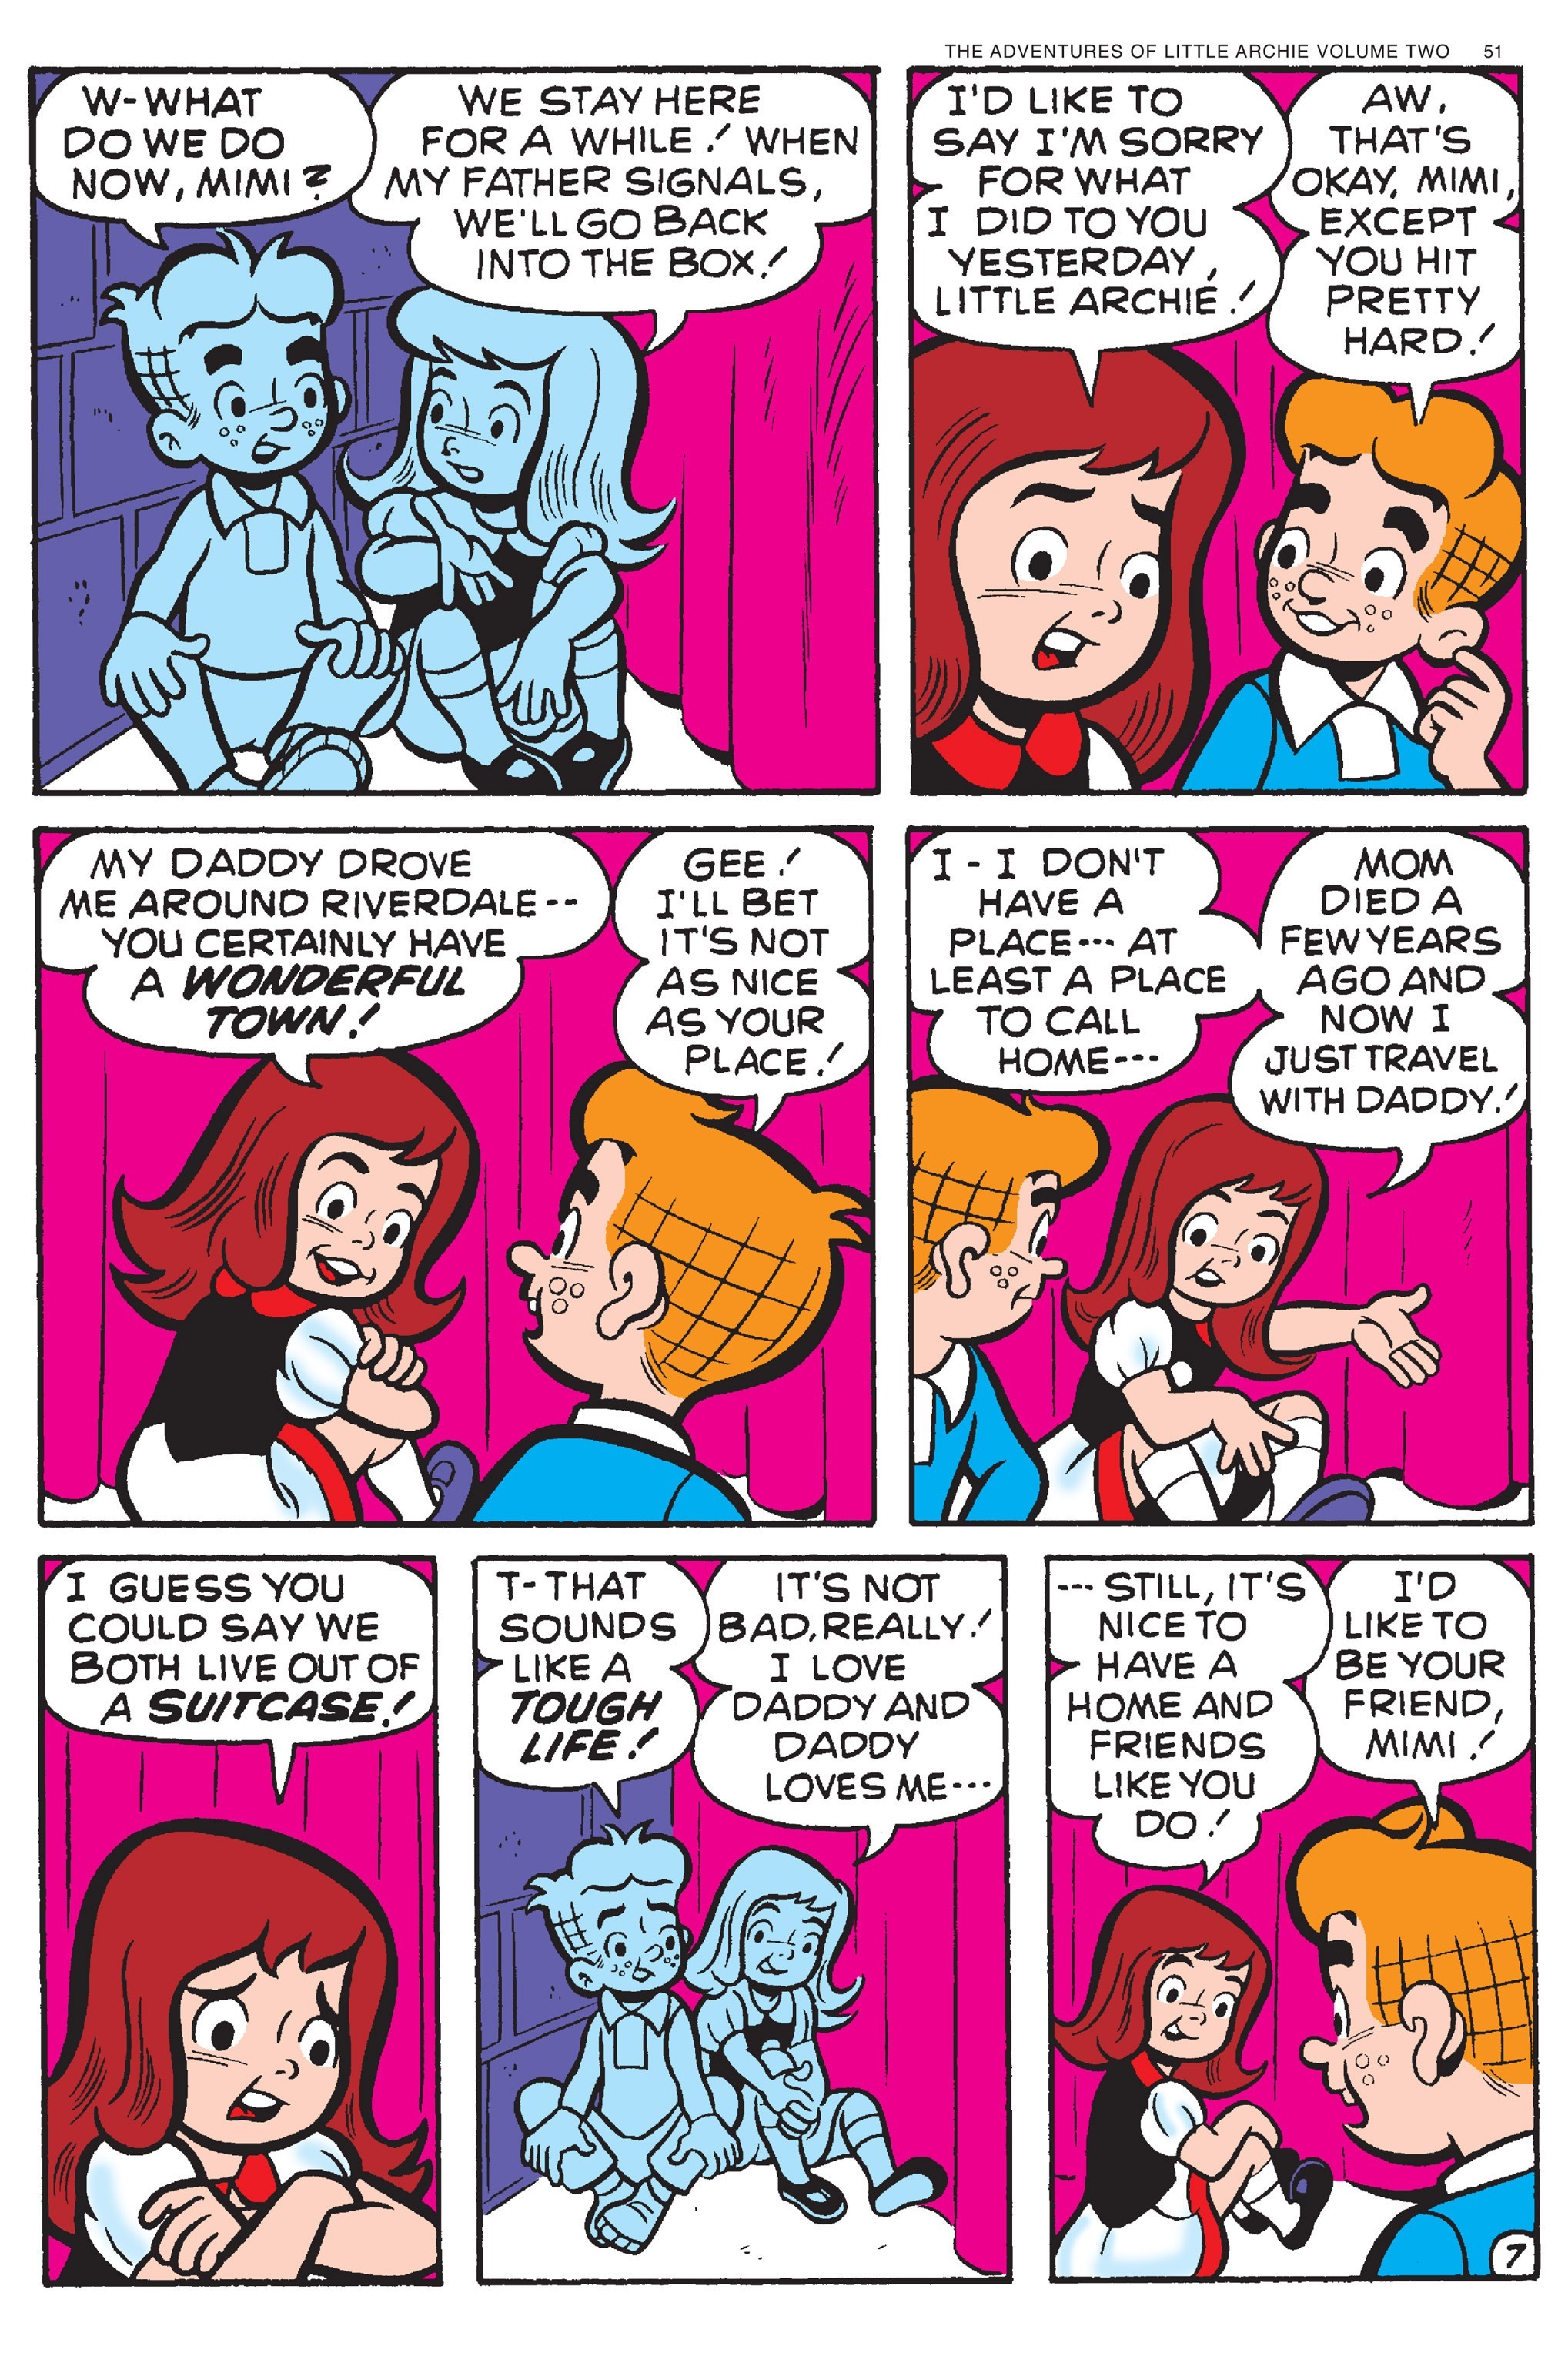 Read online Adventures of Little Archie comic -  Issue # TPB 2 - 52